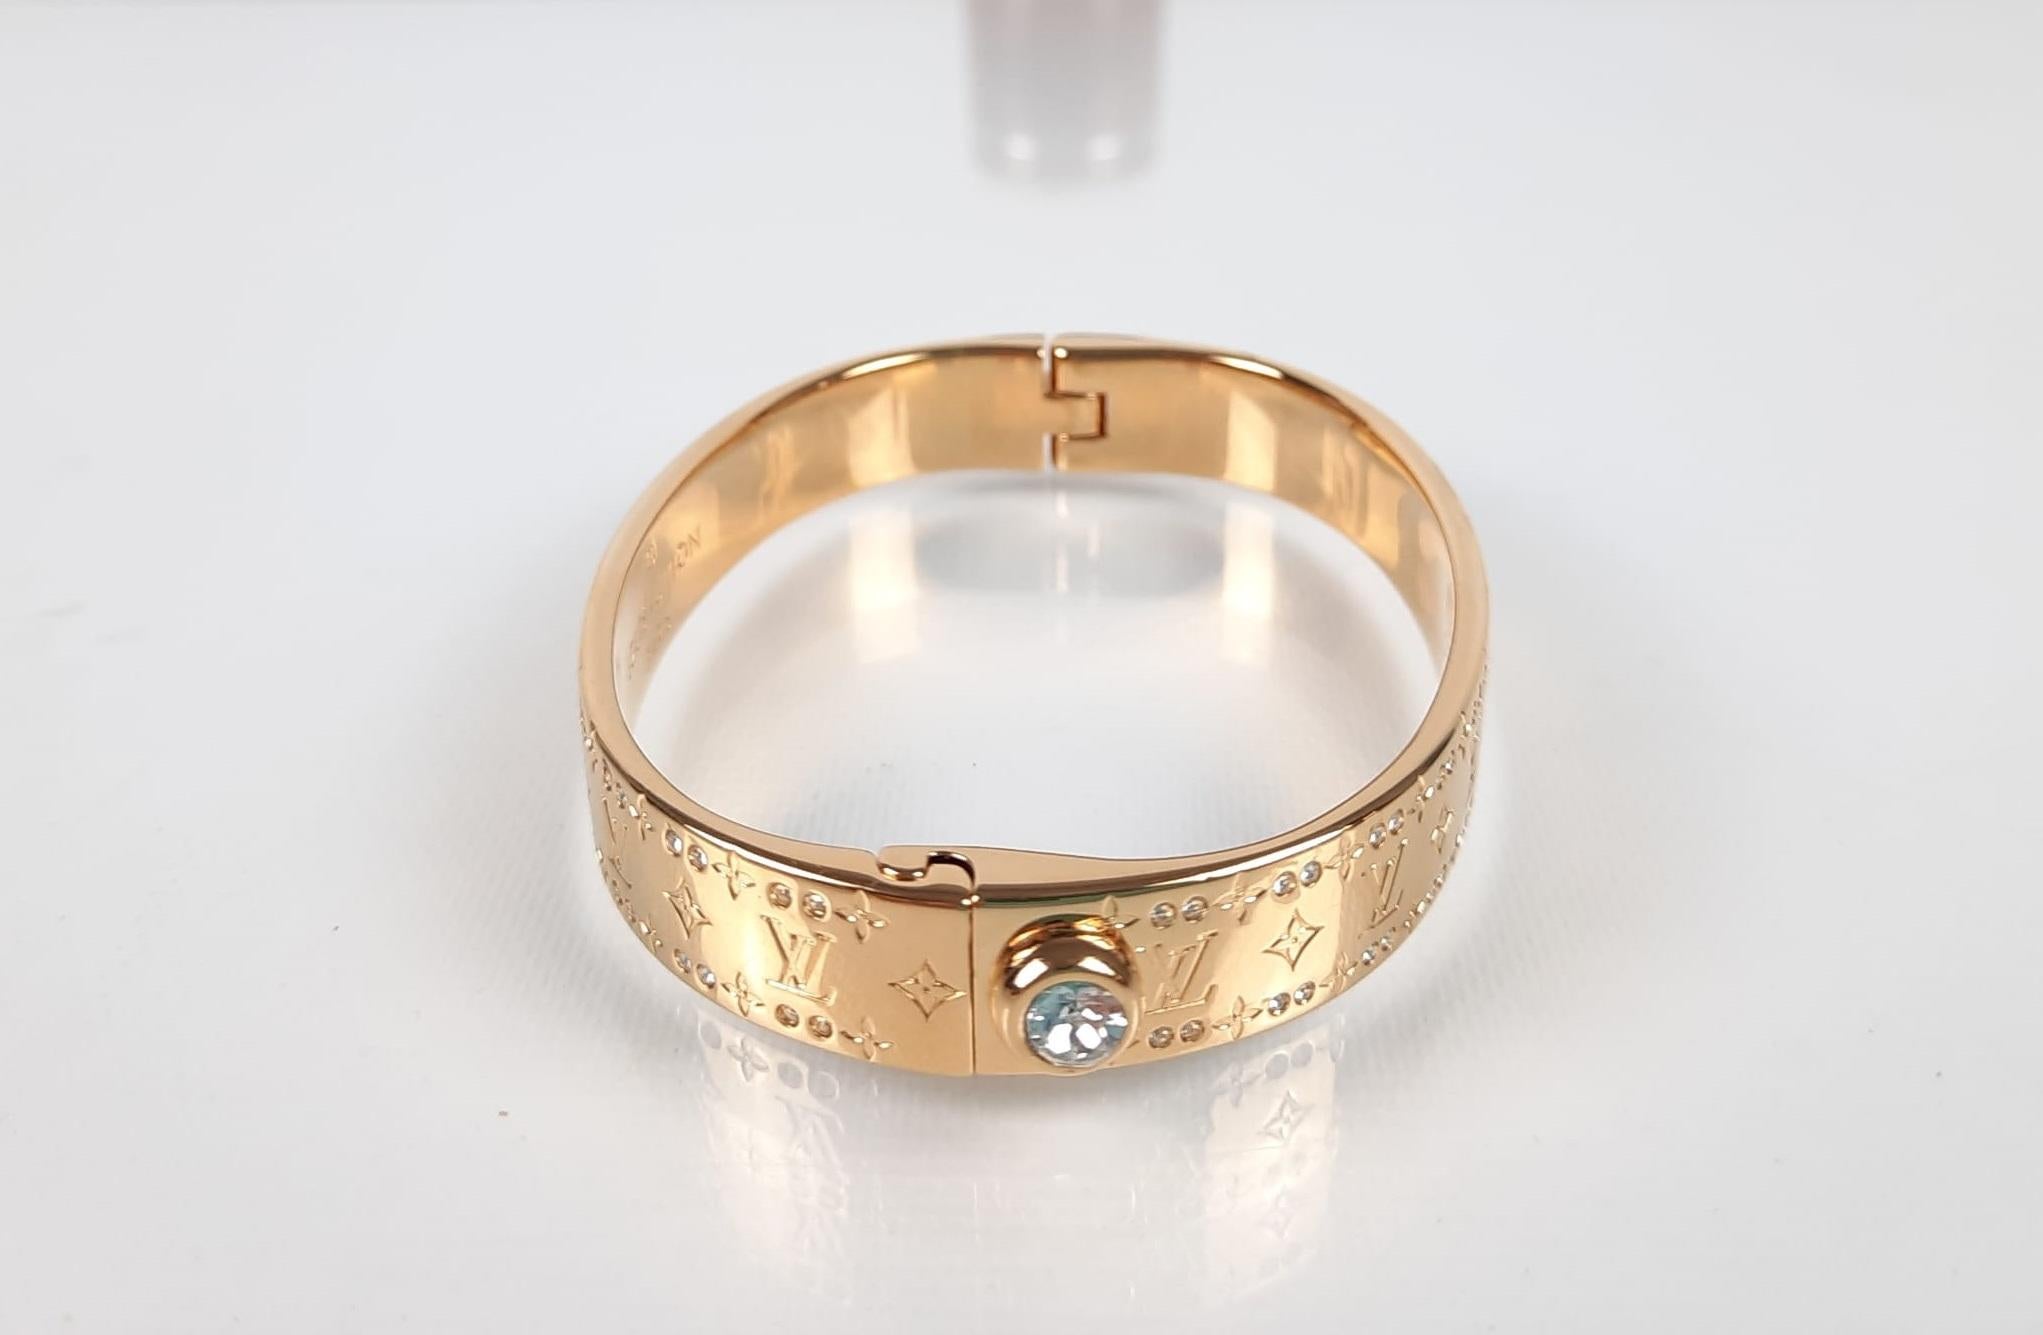 Size S
This must-have bracelet combines Louis Vuitton's iconic Monogram with refined lines of crystals for a perfect day-to-evening piece. Easy to mix and match and accumulate, it will add an elevated touch to any outfit.
Metal with gold-colour